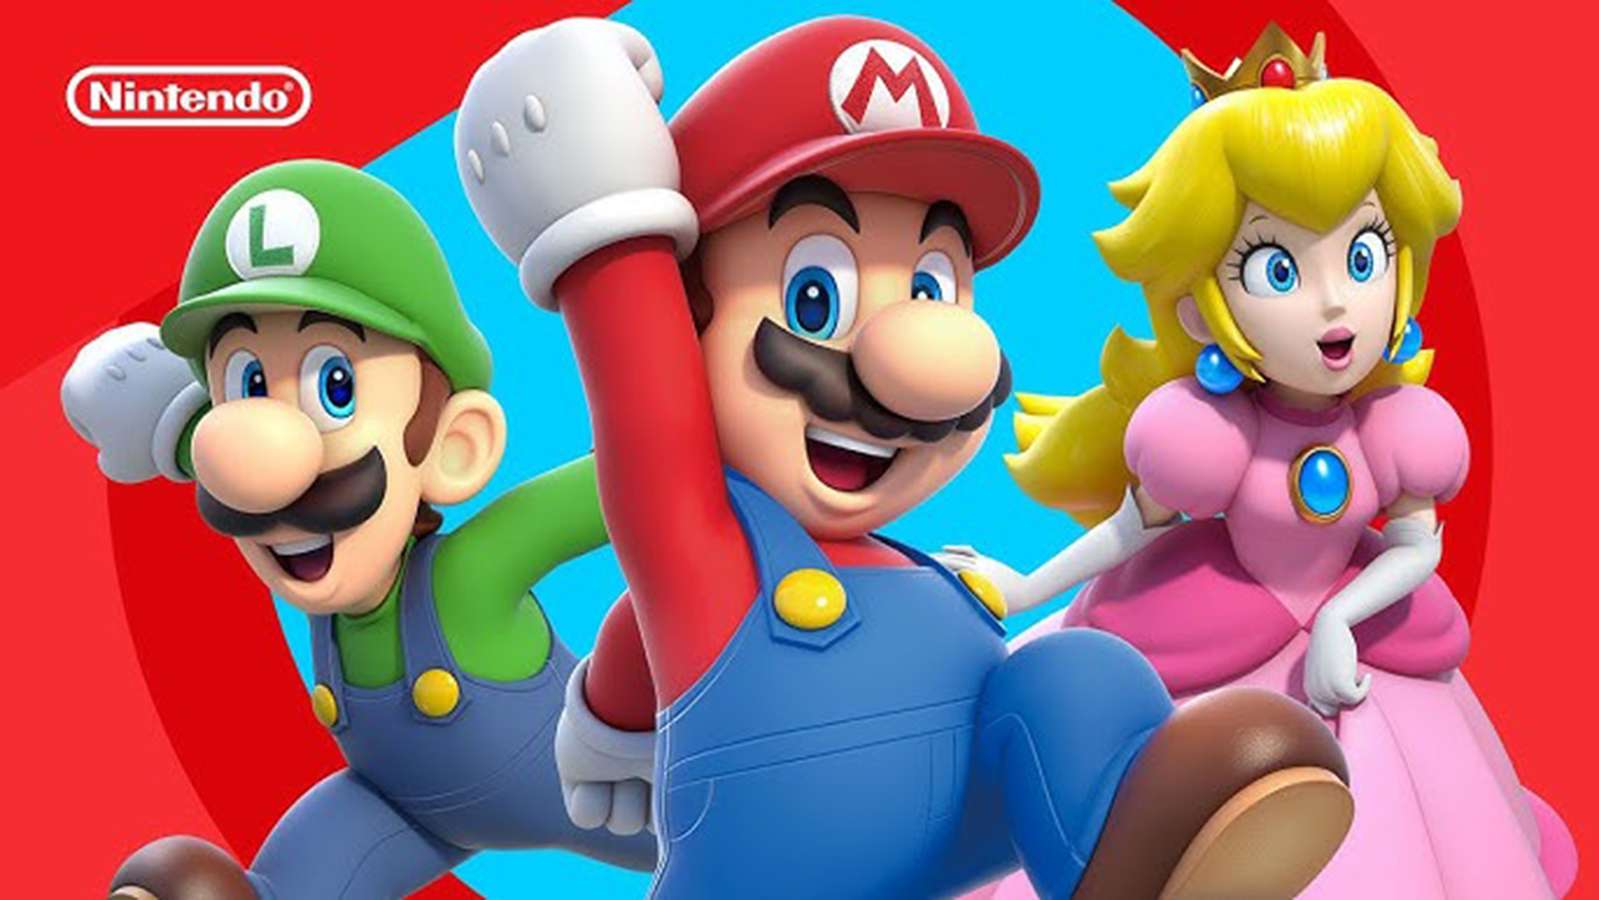 Nintendo President Expects More Complex & Lengthy Game Development Cycle In Future